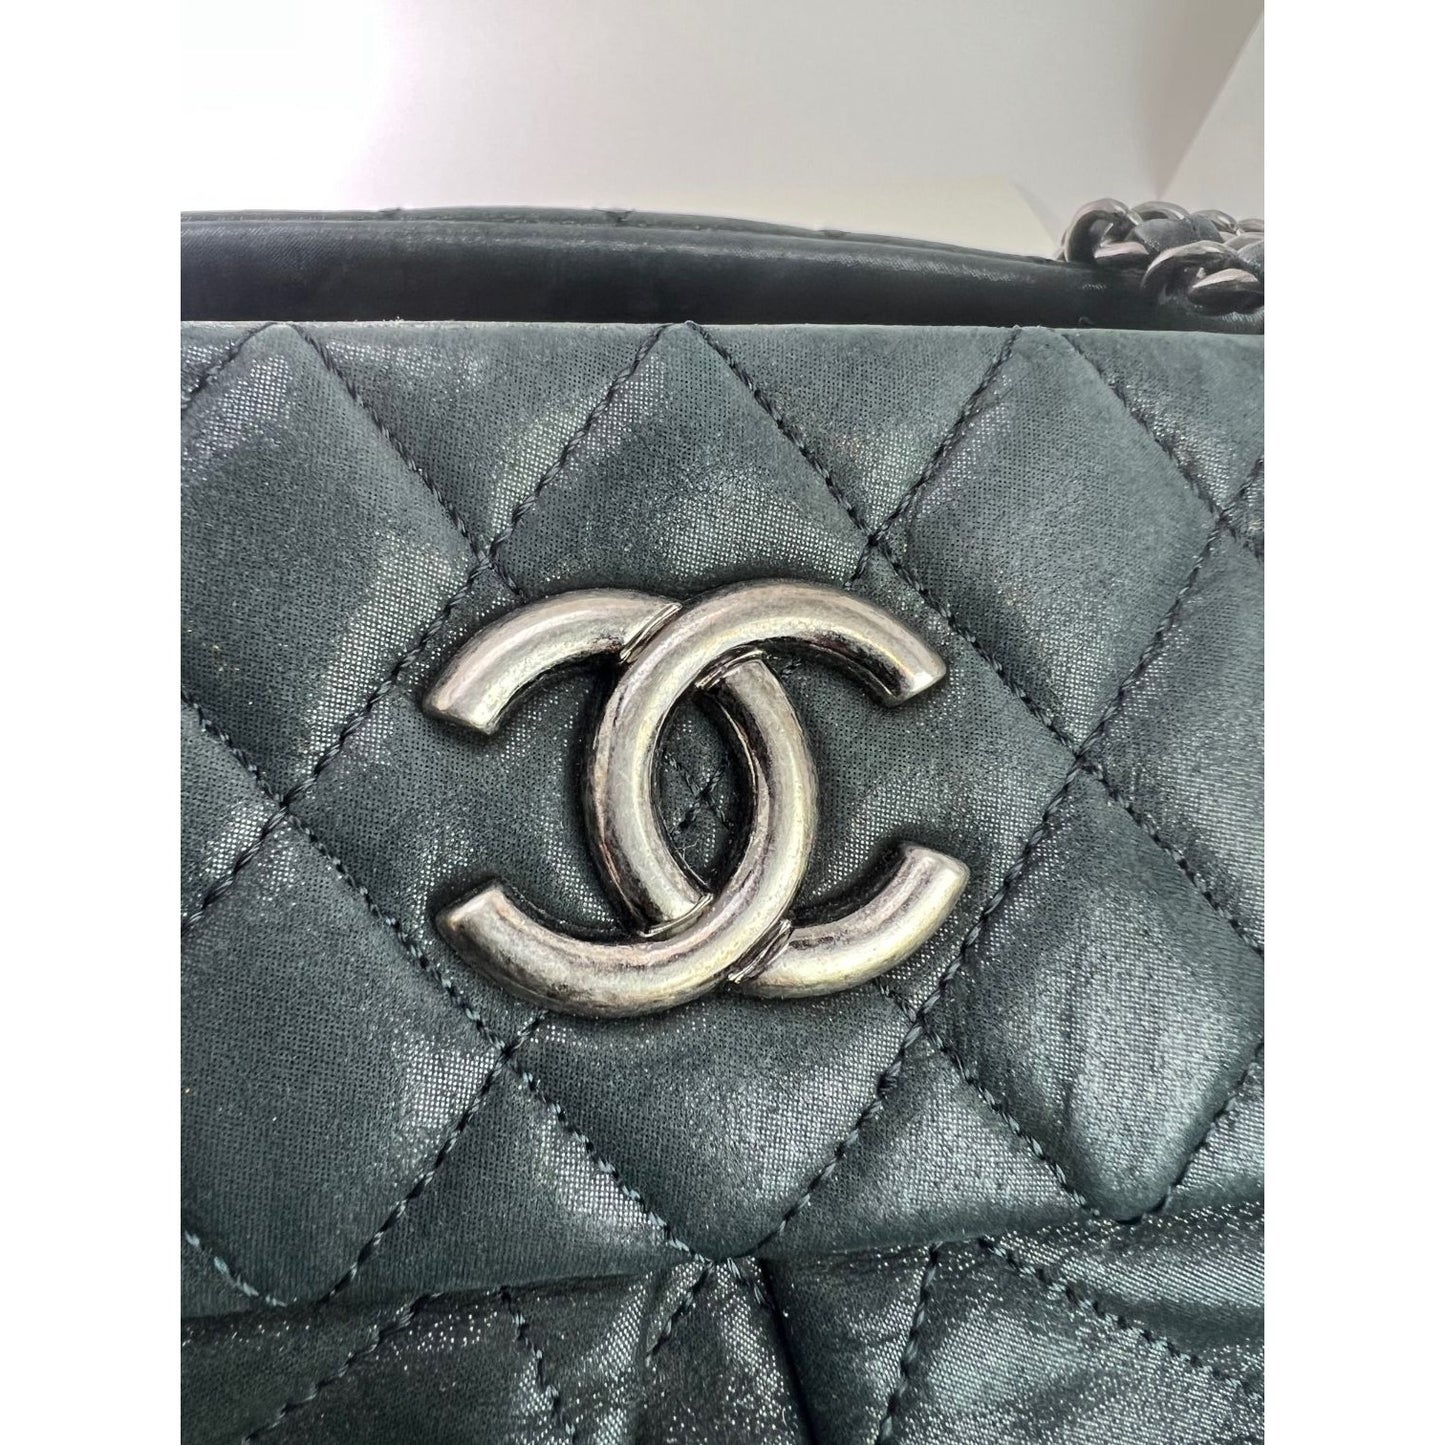 Chanel Glazed Distressed Calfskin Leather Tote Black with Silver Hardware -  Luxury In Reach